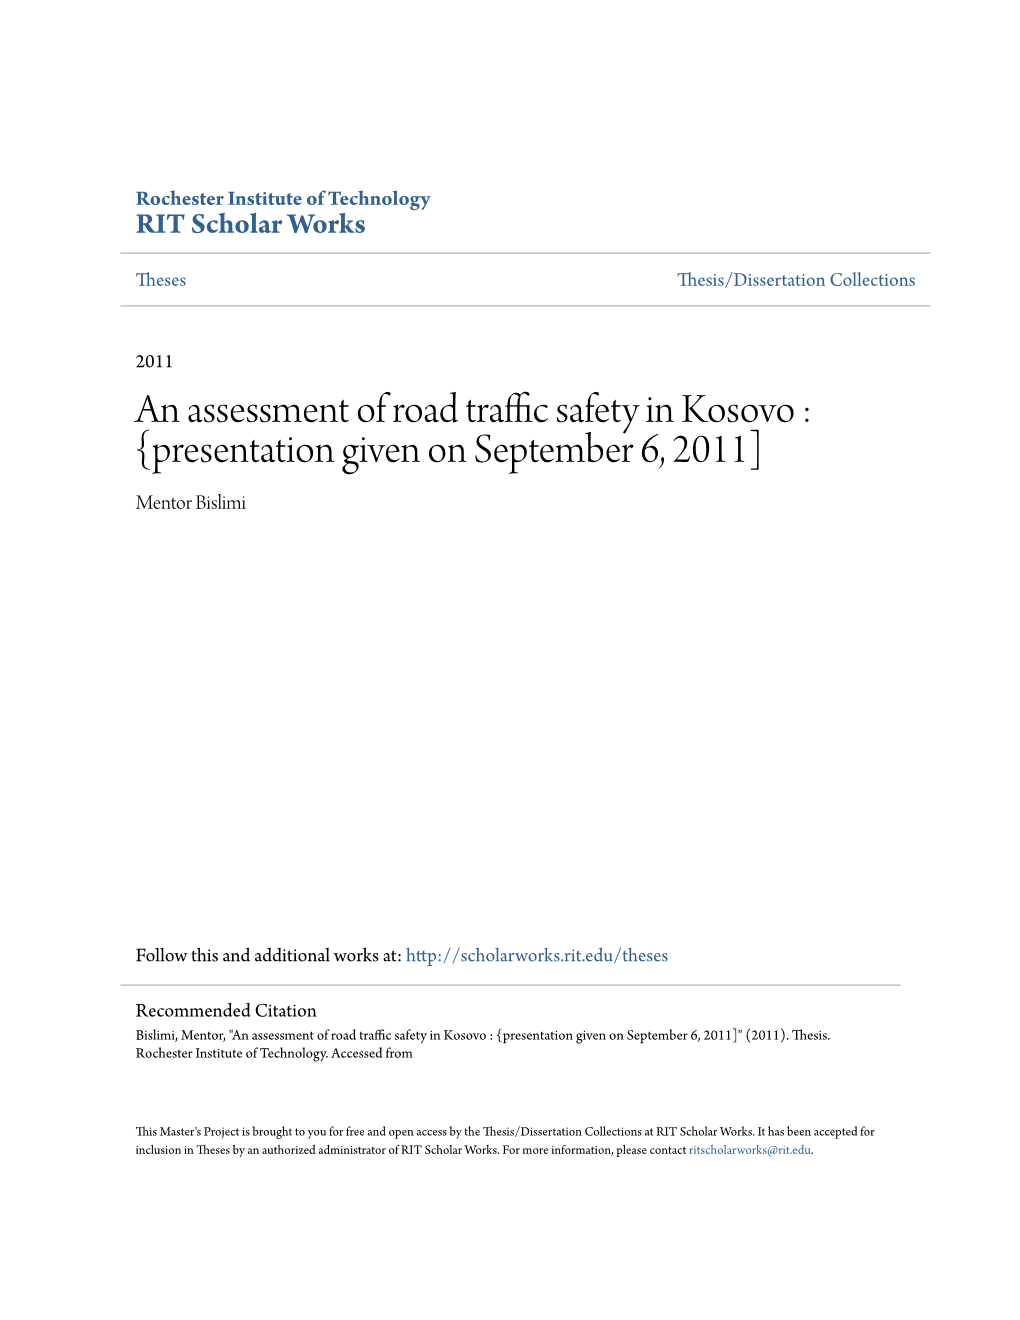 An Assessment of Road Traffic Safety in Kosovo : {Presentation Given on September 6, 2011]